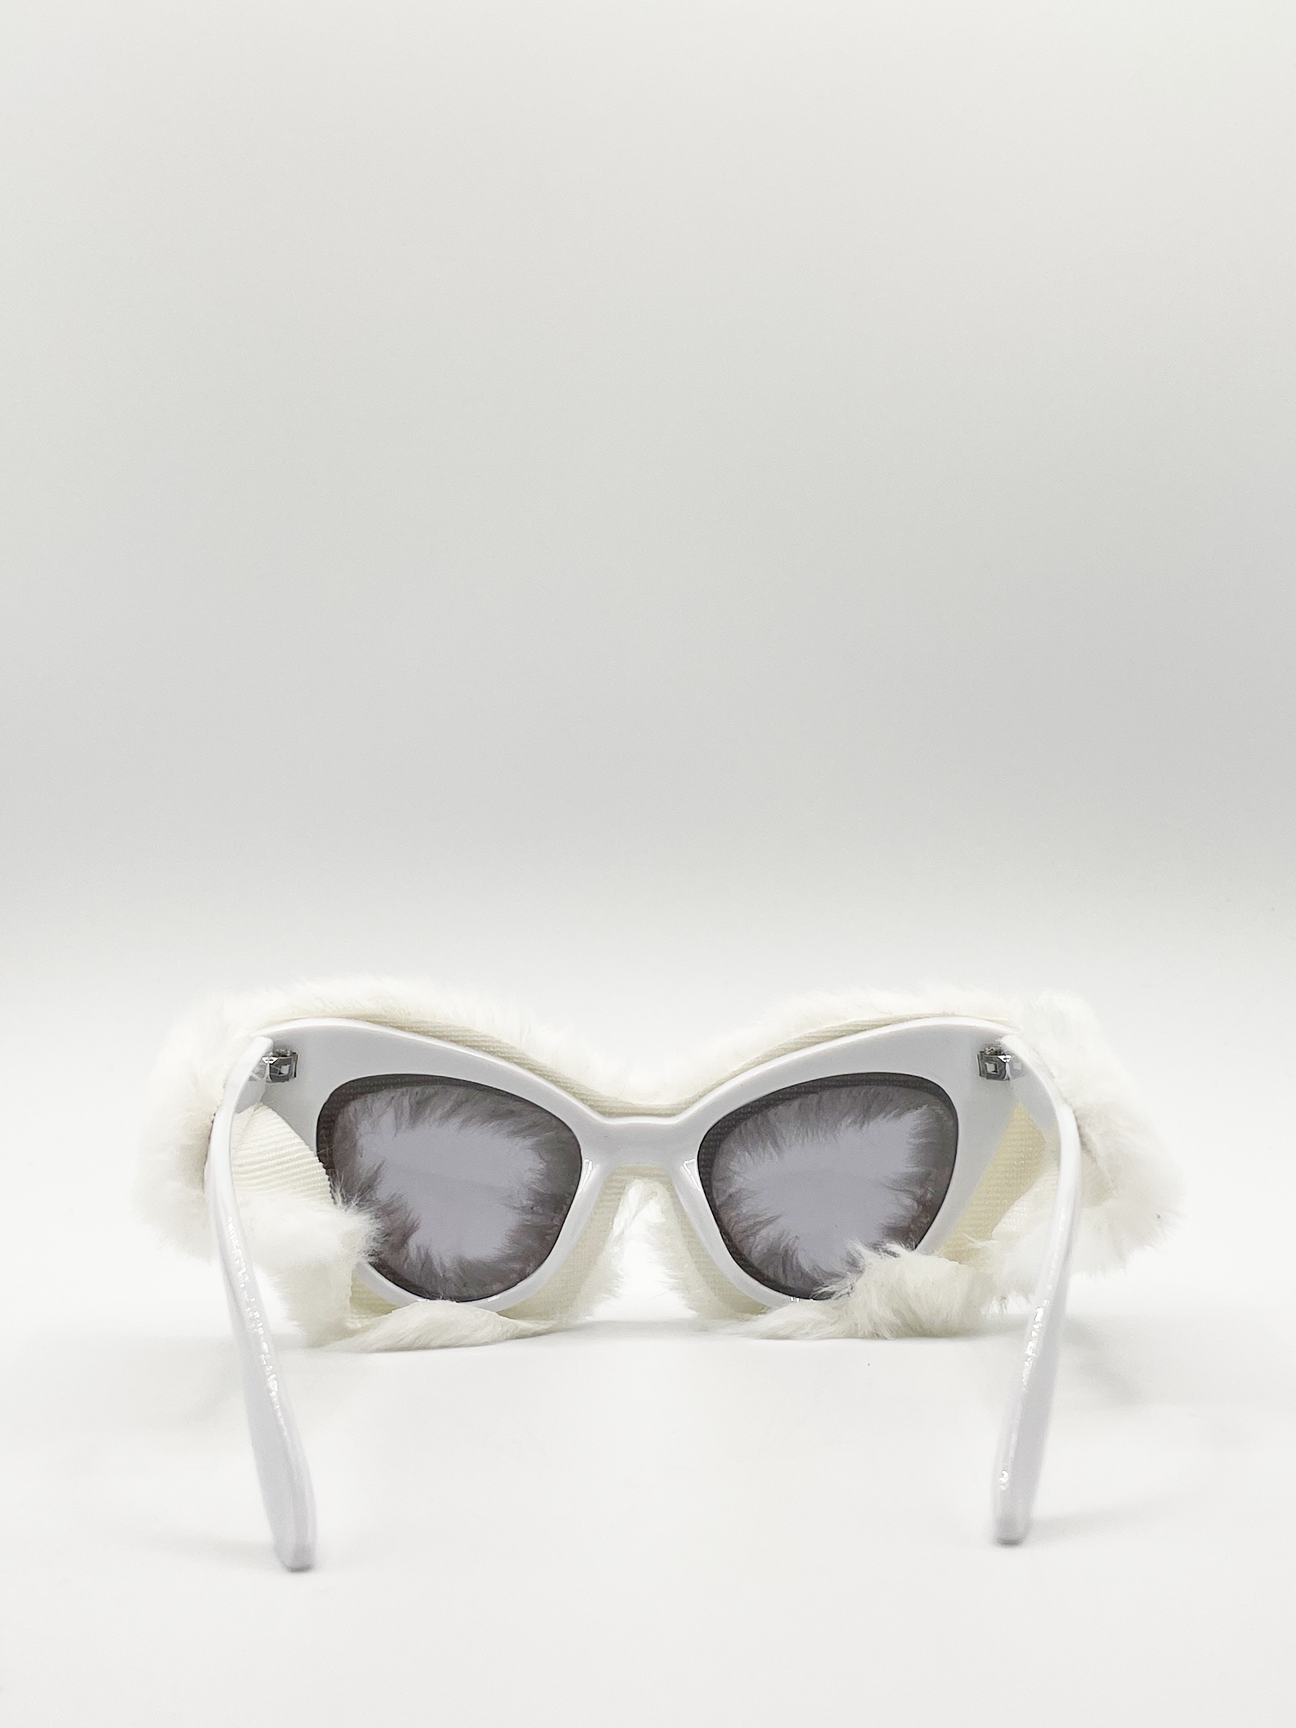 Faux fur novelty sunglasses in white